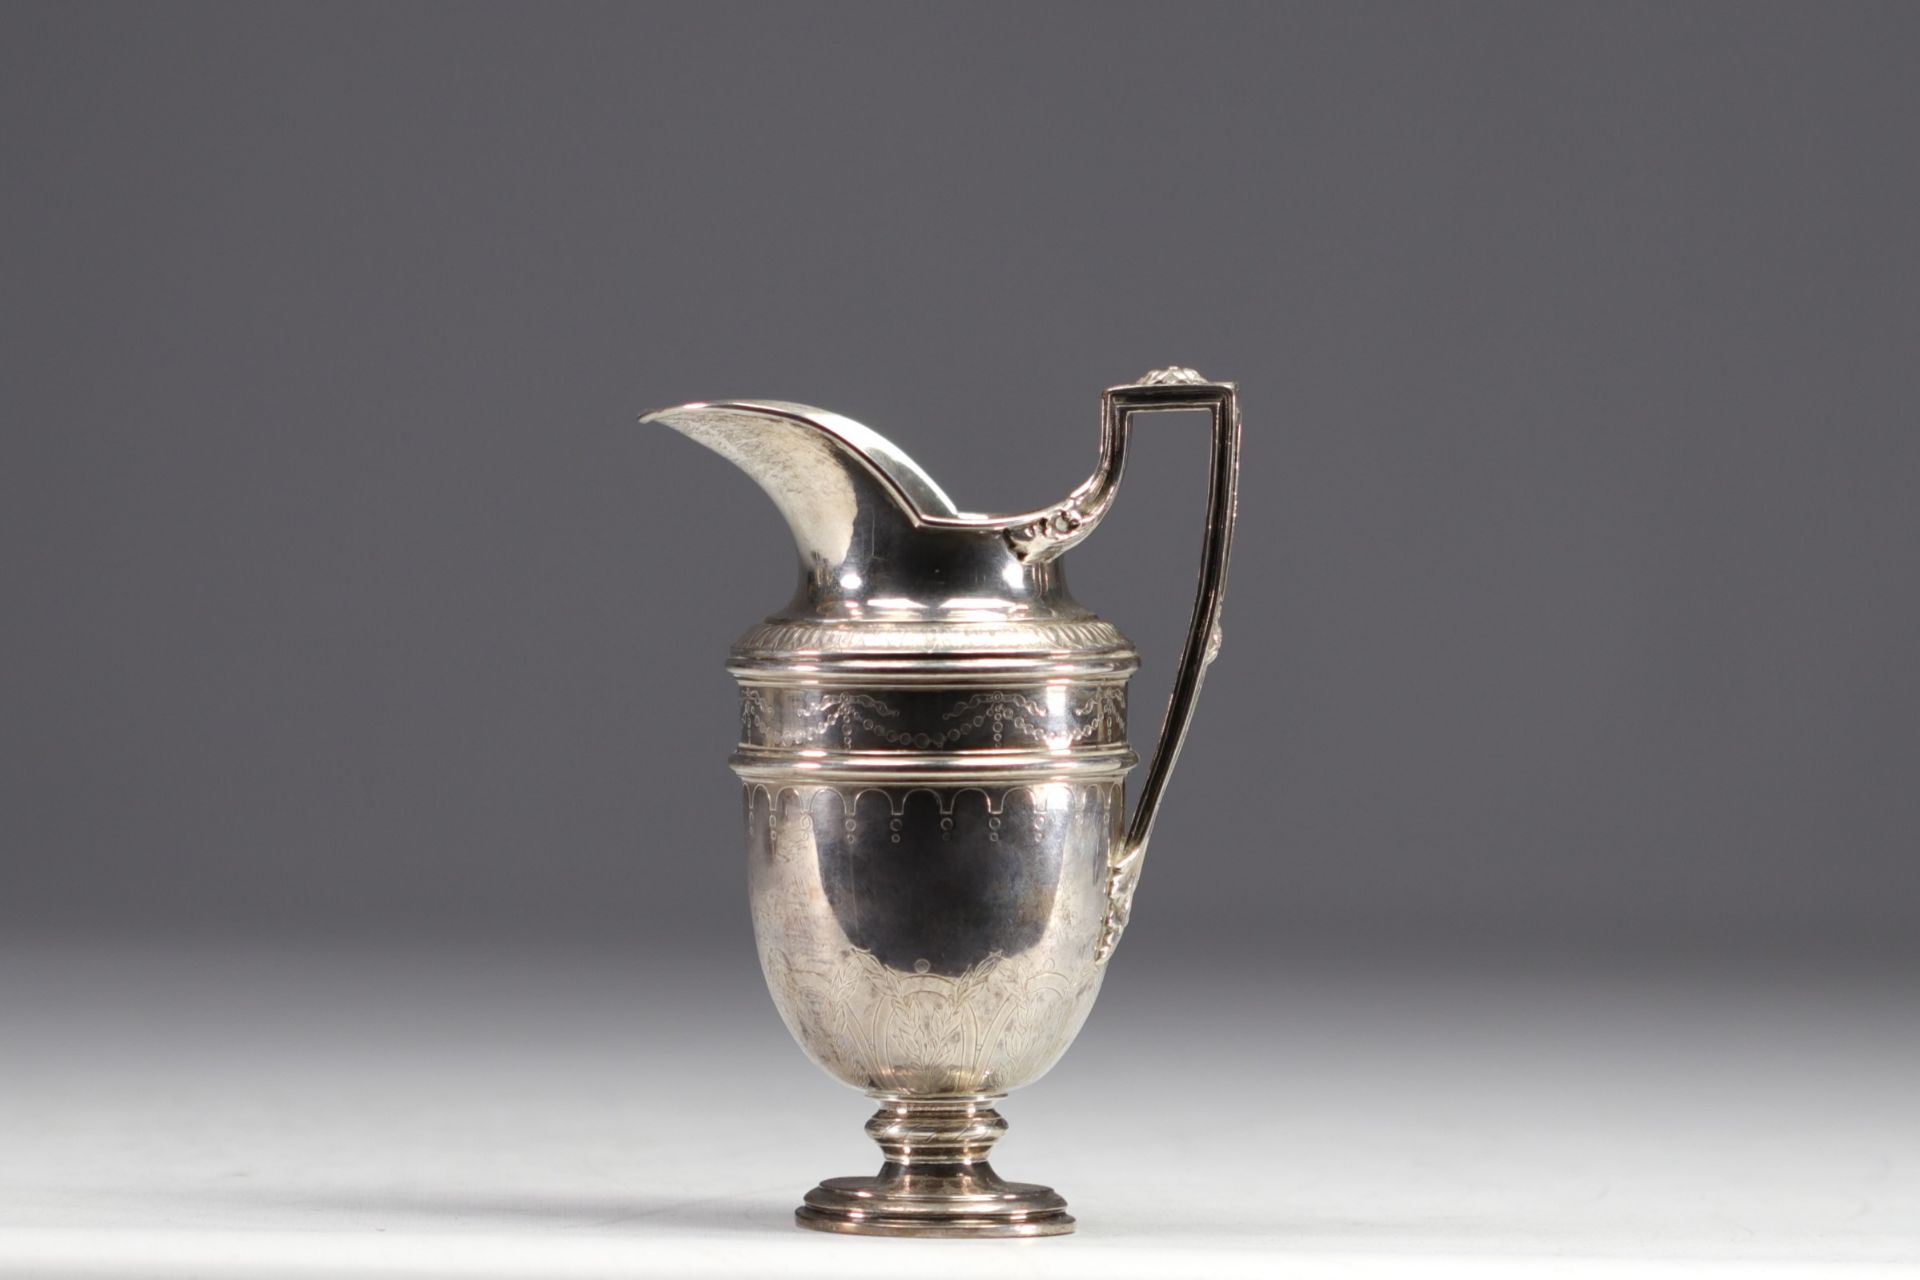 Jean-Baptiste Claude ODIOT a PARIS - Solid silver coffee service. - Image 5 of 11